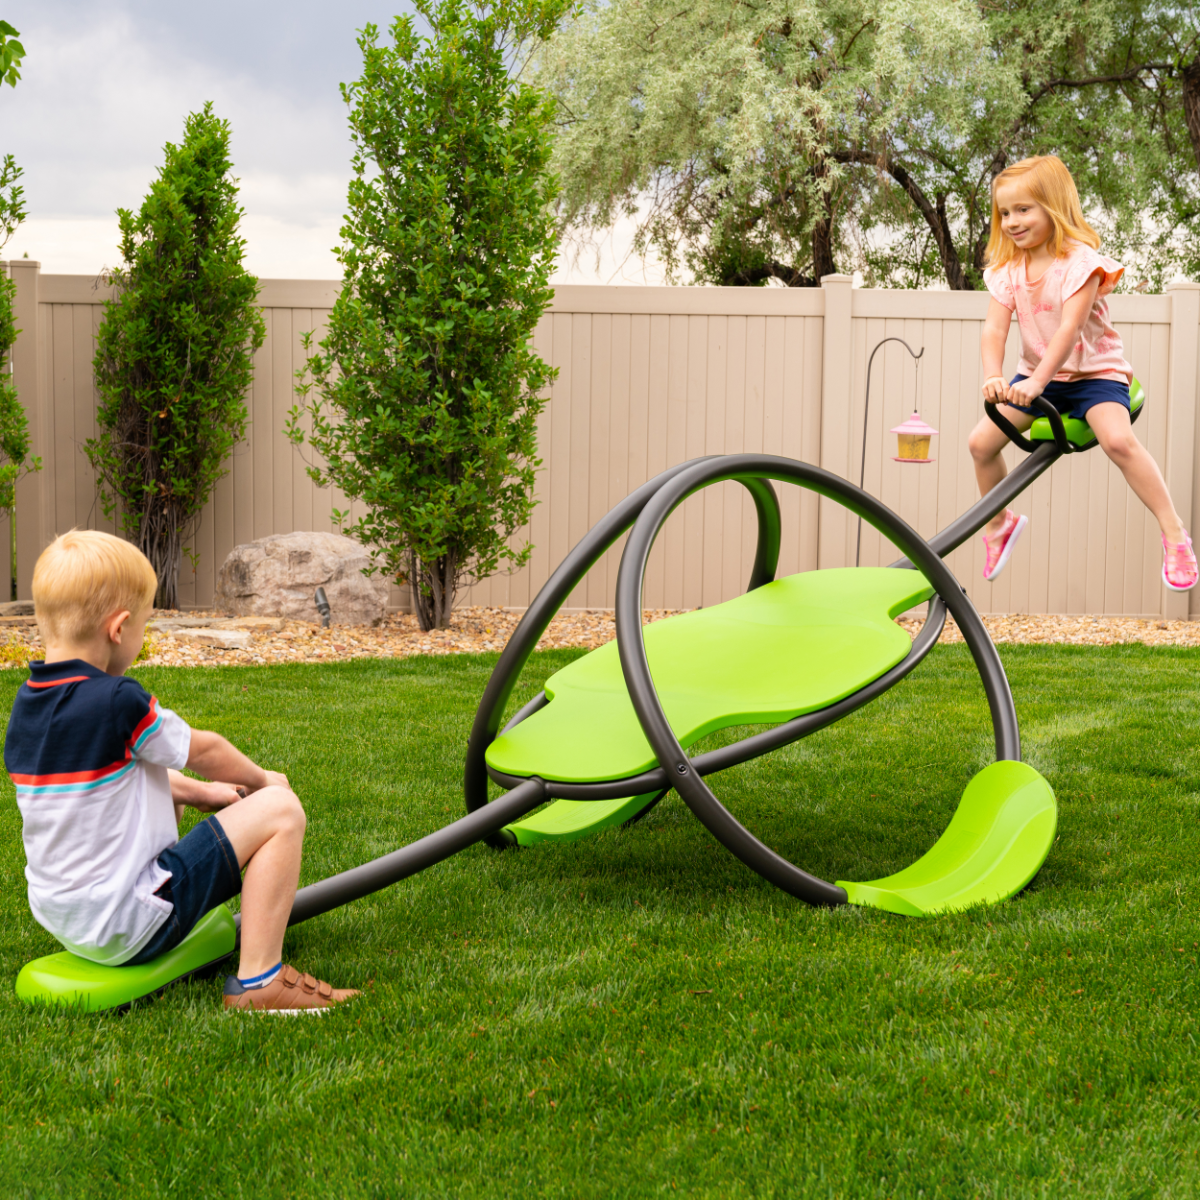 Oval Teeter Totter (90993)